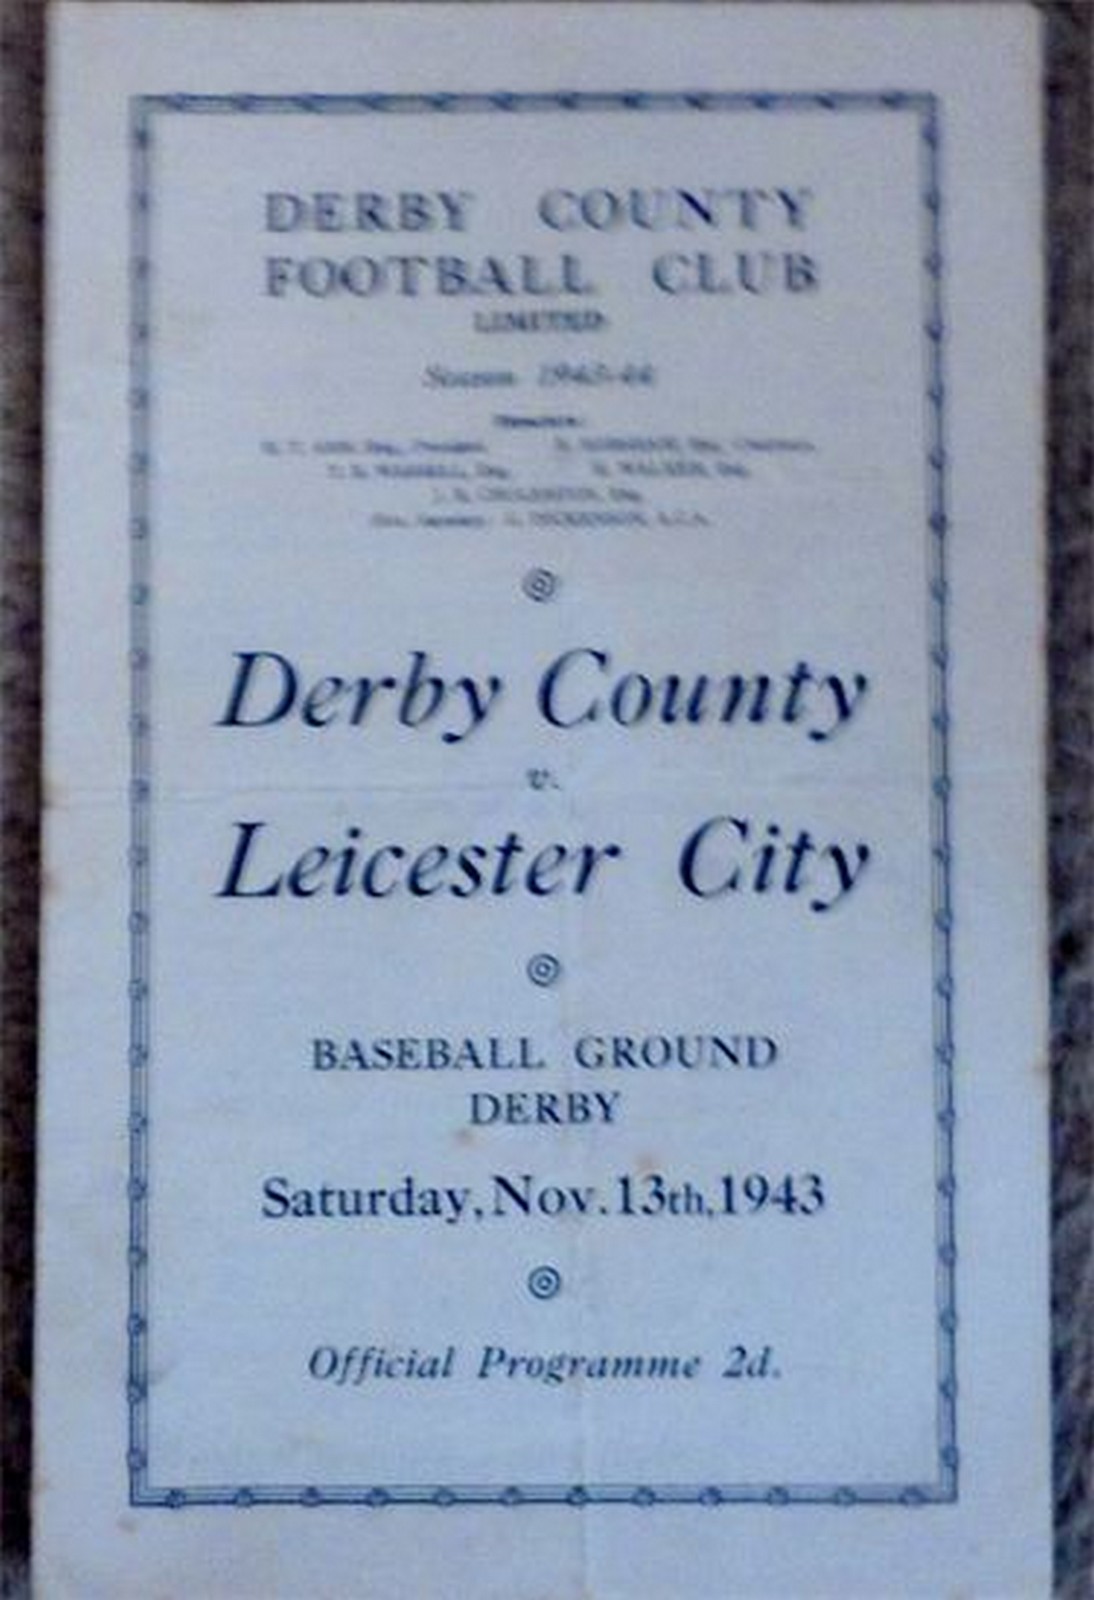 DERBY COUNTY V LEICESTER CITY 1943/44 Rare 4 page programme for this Football Lge North match slt